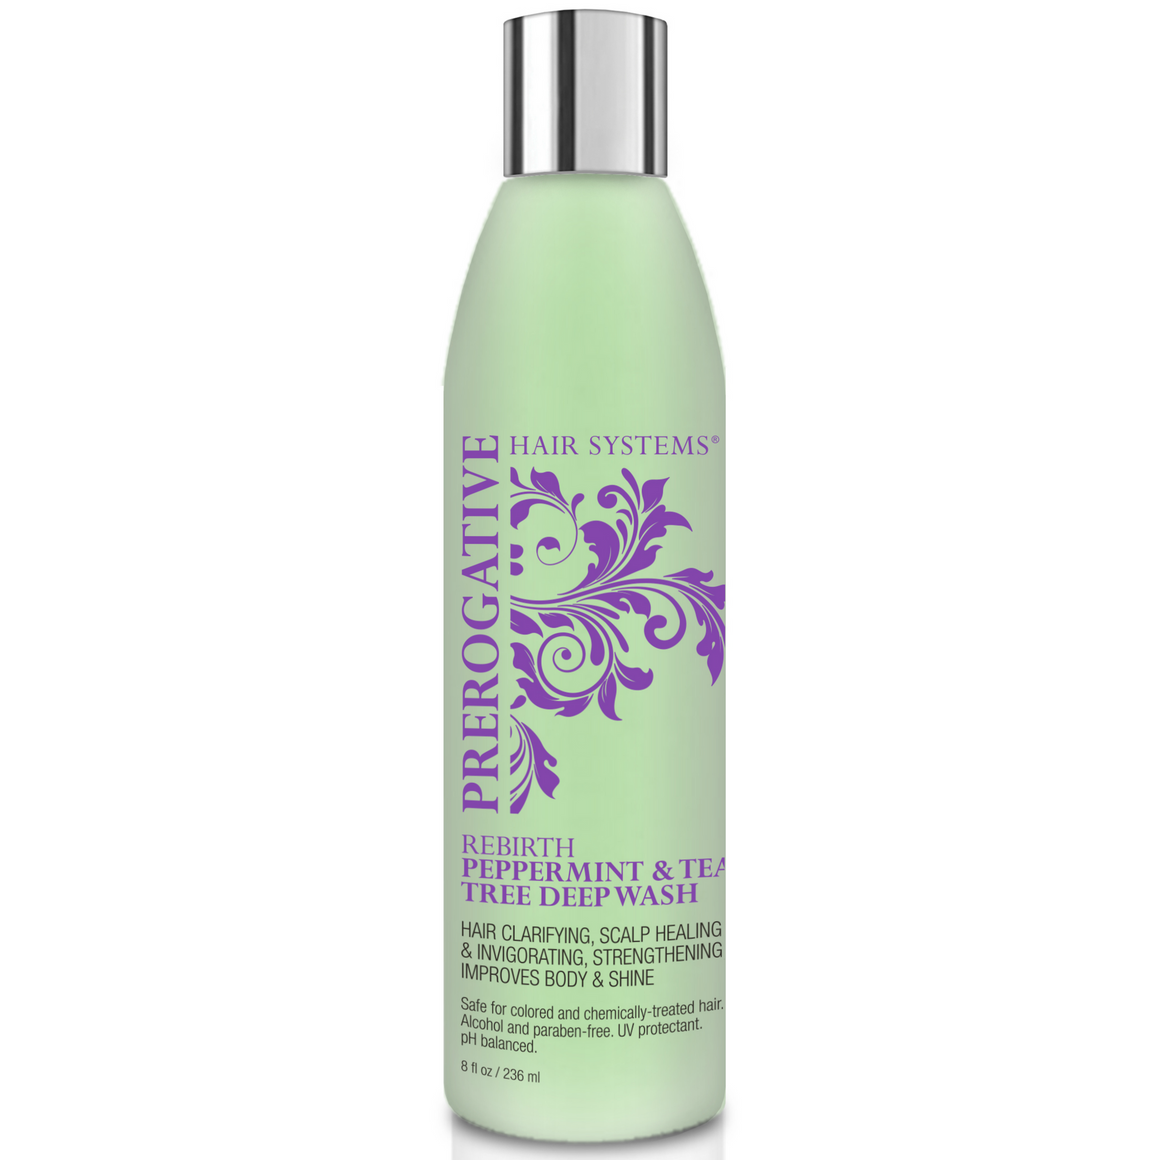 REBIRTH Peppermint & Tea Tree Deep Wash - The best essential oil shampoo for women with natural hair.